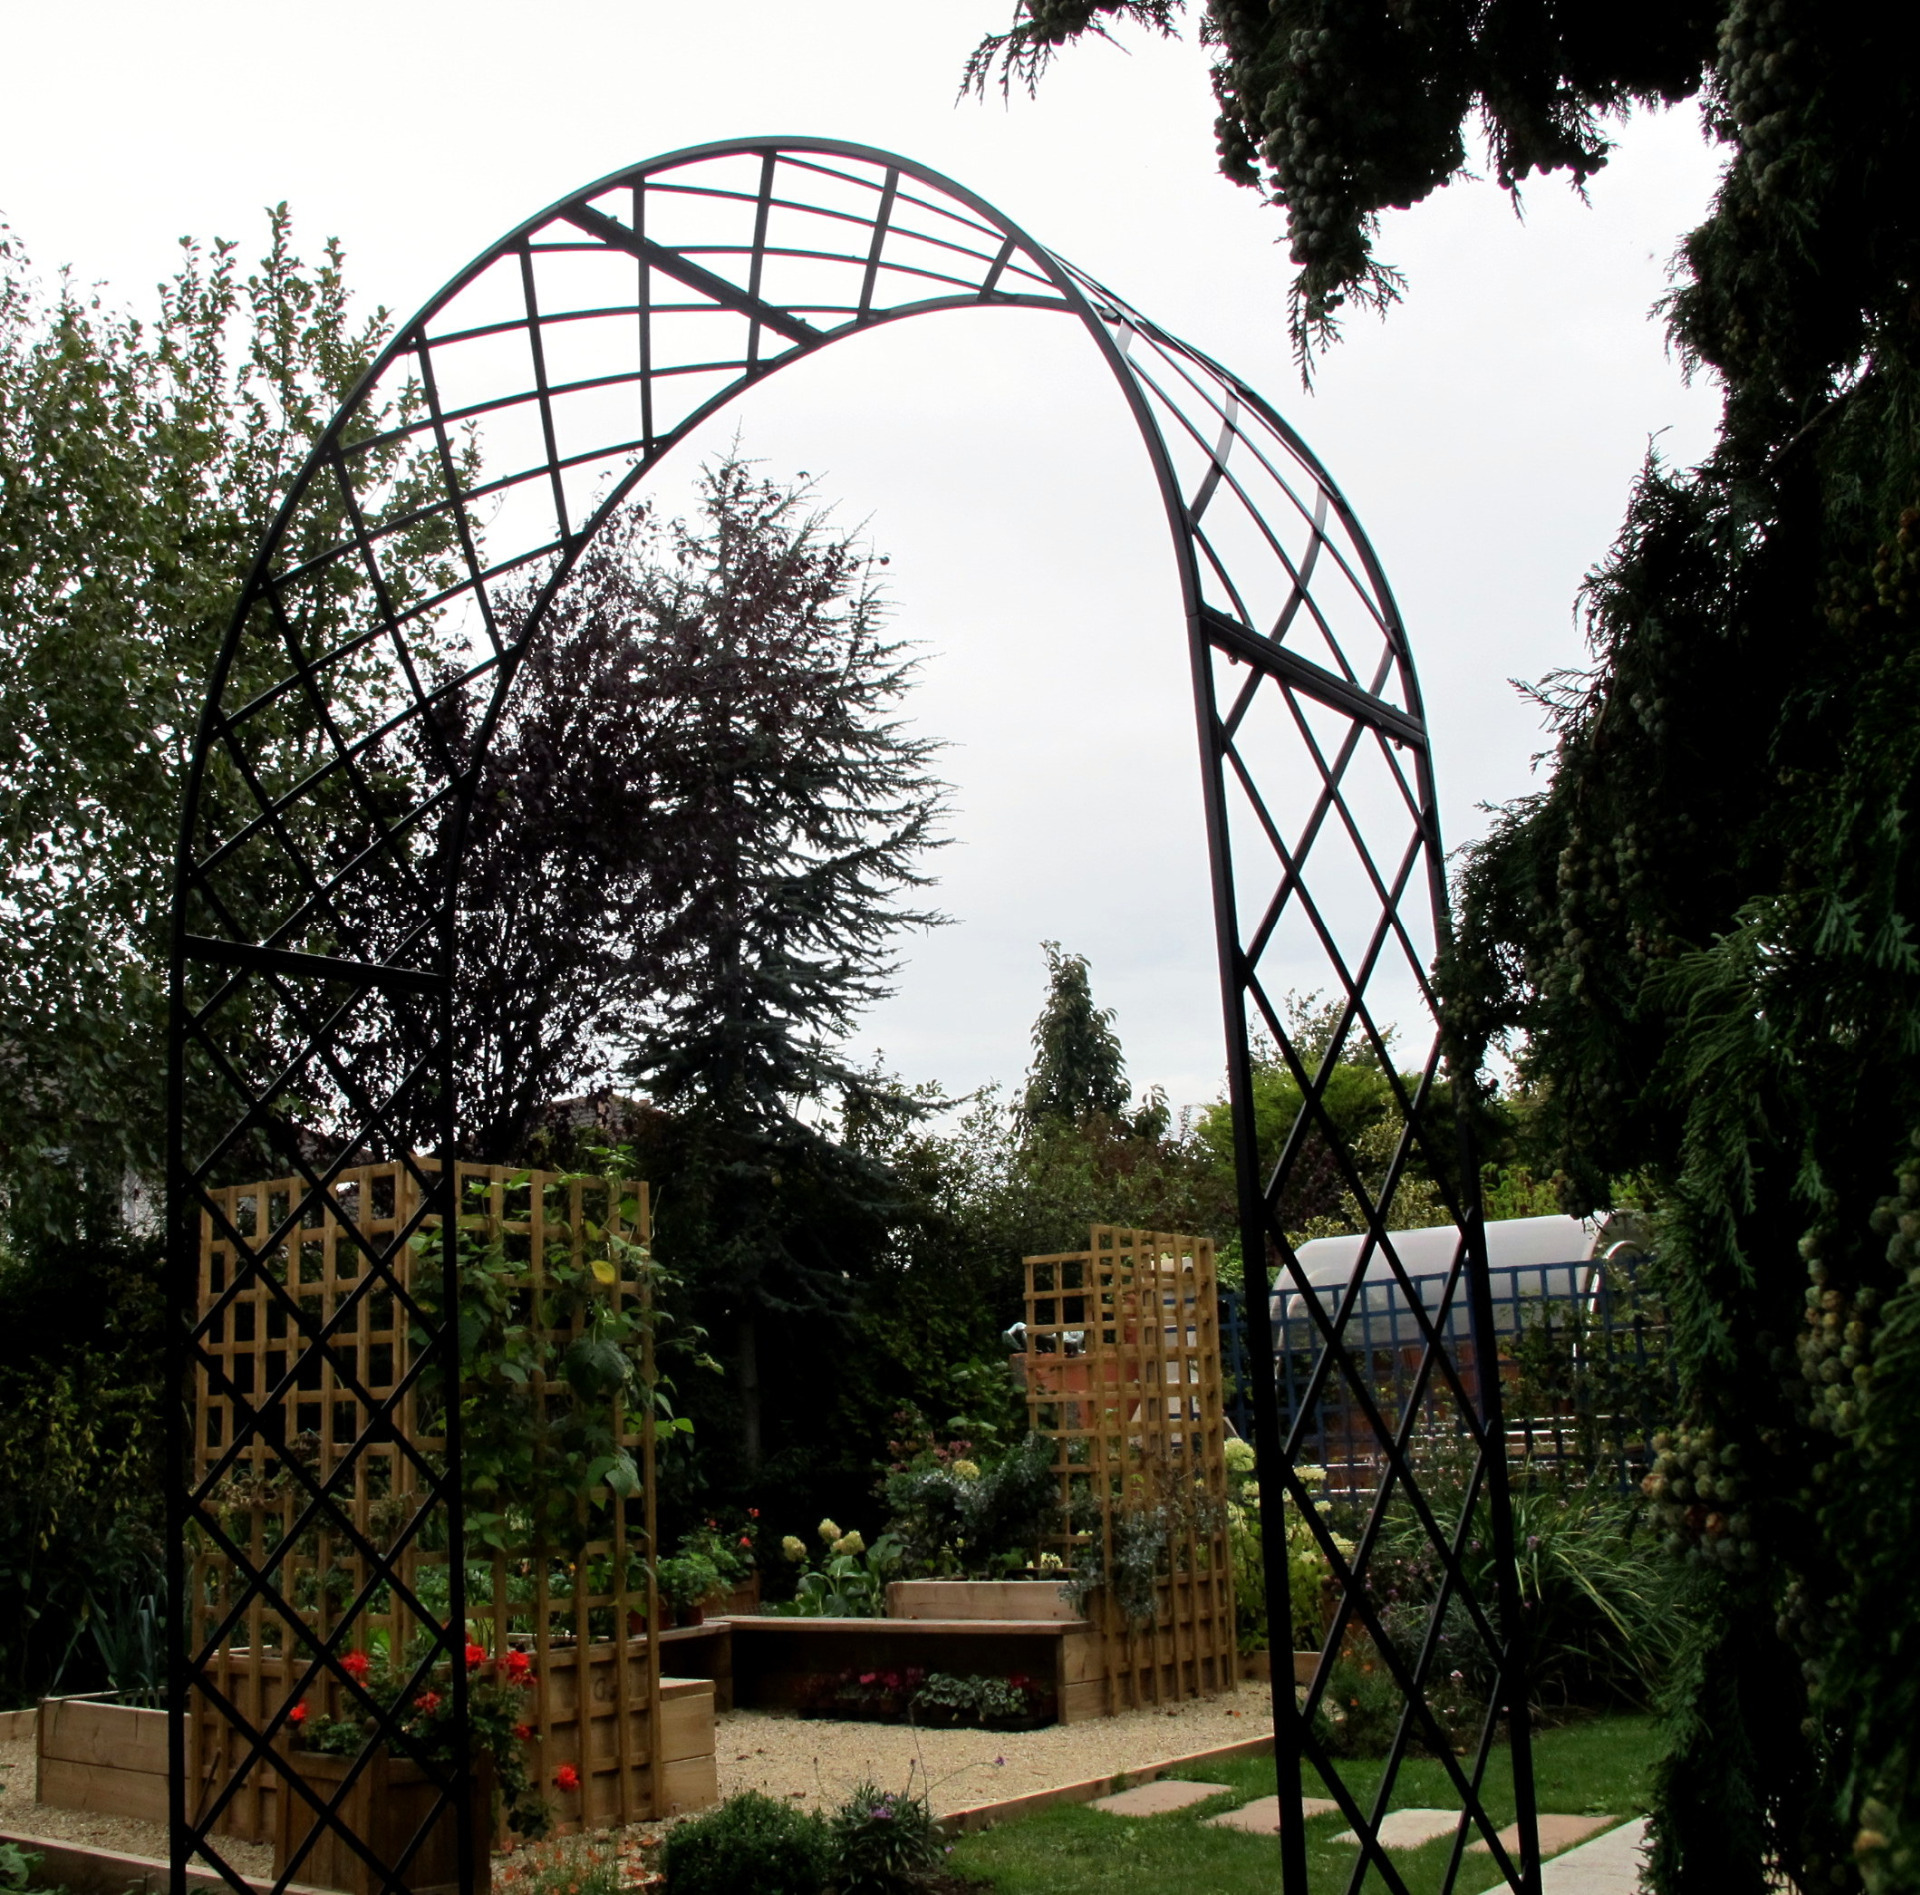 Bagatelle Steel Rose arches, powder coated galvanized steel. Supply + Installation services from Owen Chubb Garden Landscapers. Tel 087-2306128.